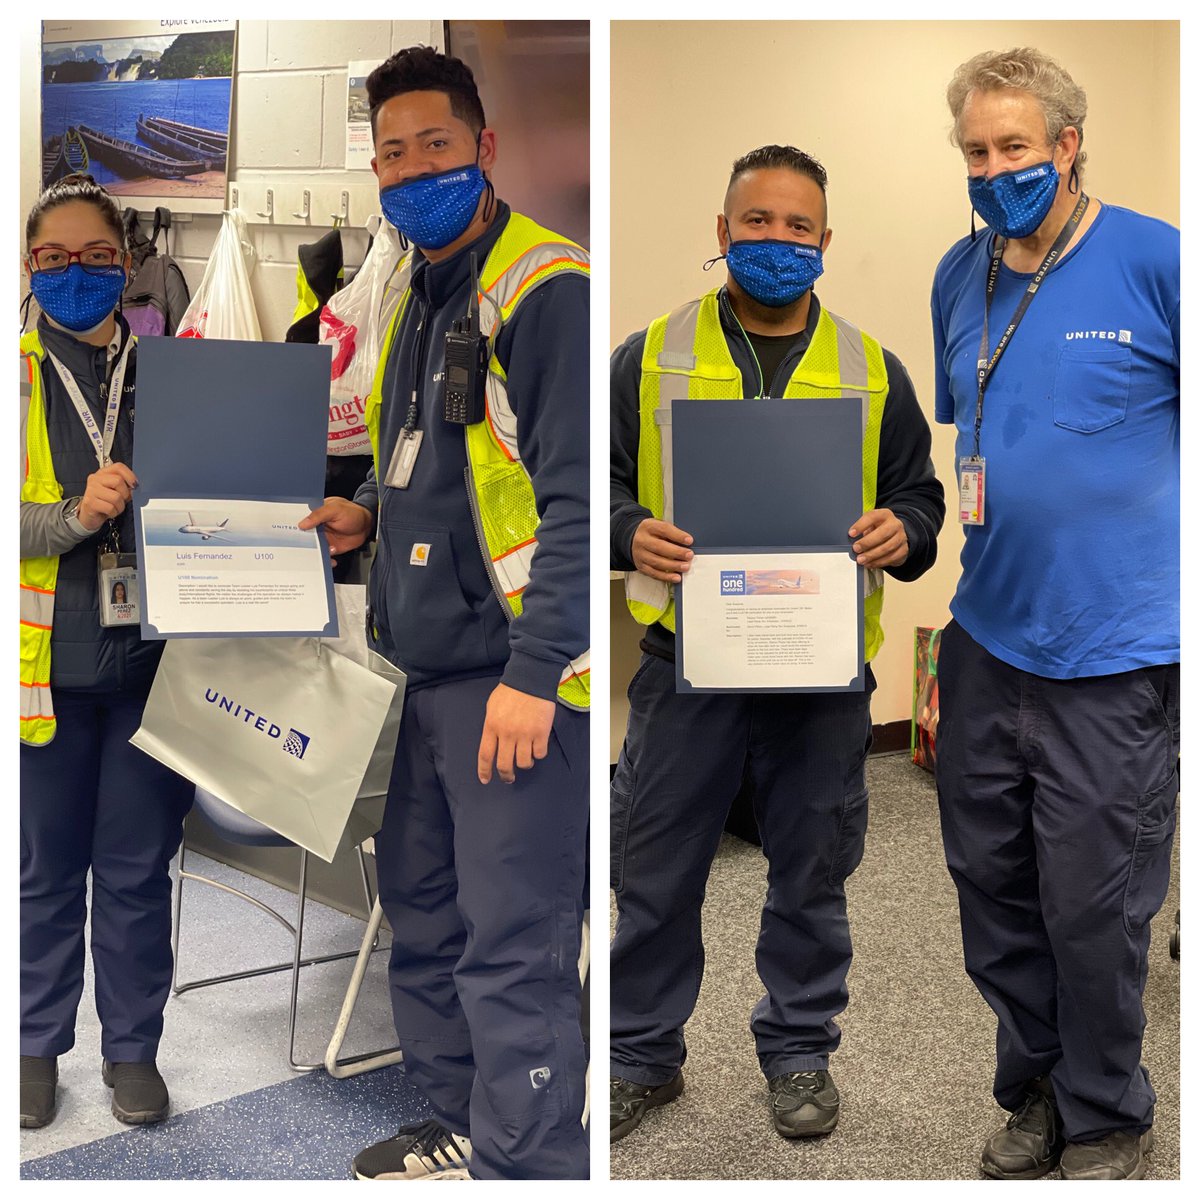 “If you take care of your employees, they'll take care of your customers”~R. Branson...Congratulations to our PM U100 recipients, outstanding performance and achievement. @susannesworld @SharonP03981739 #ewrproud #beingunited